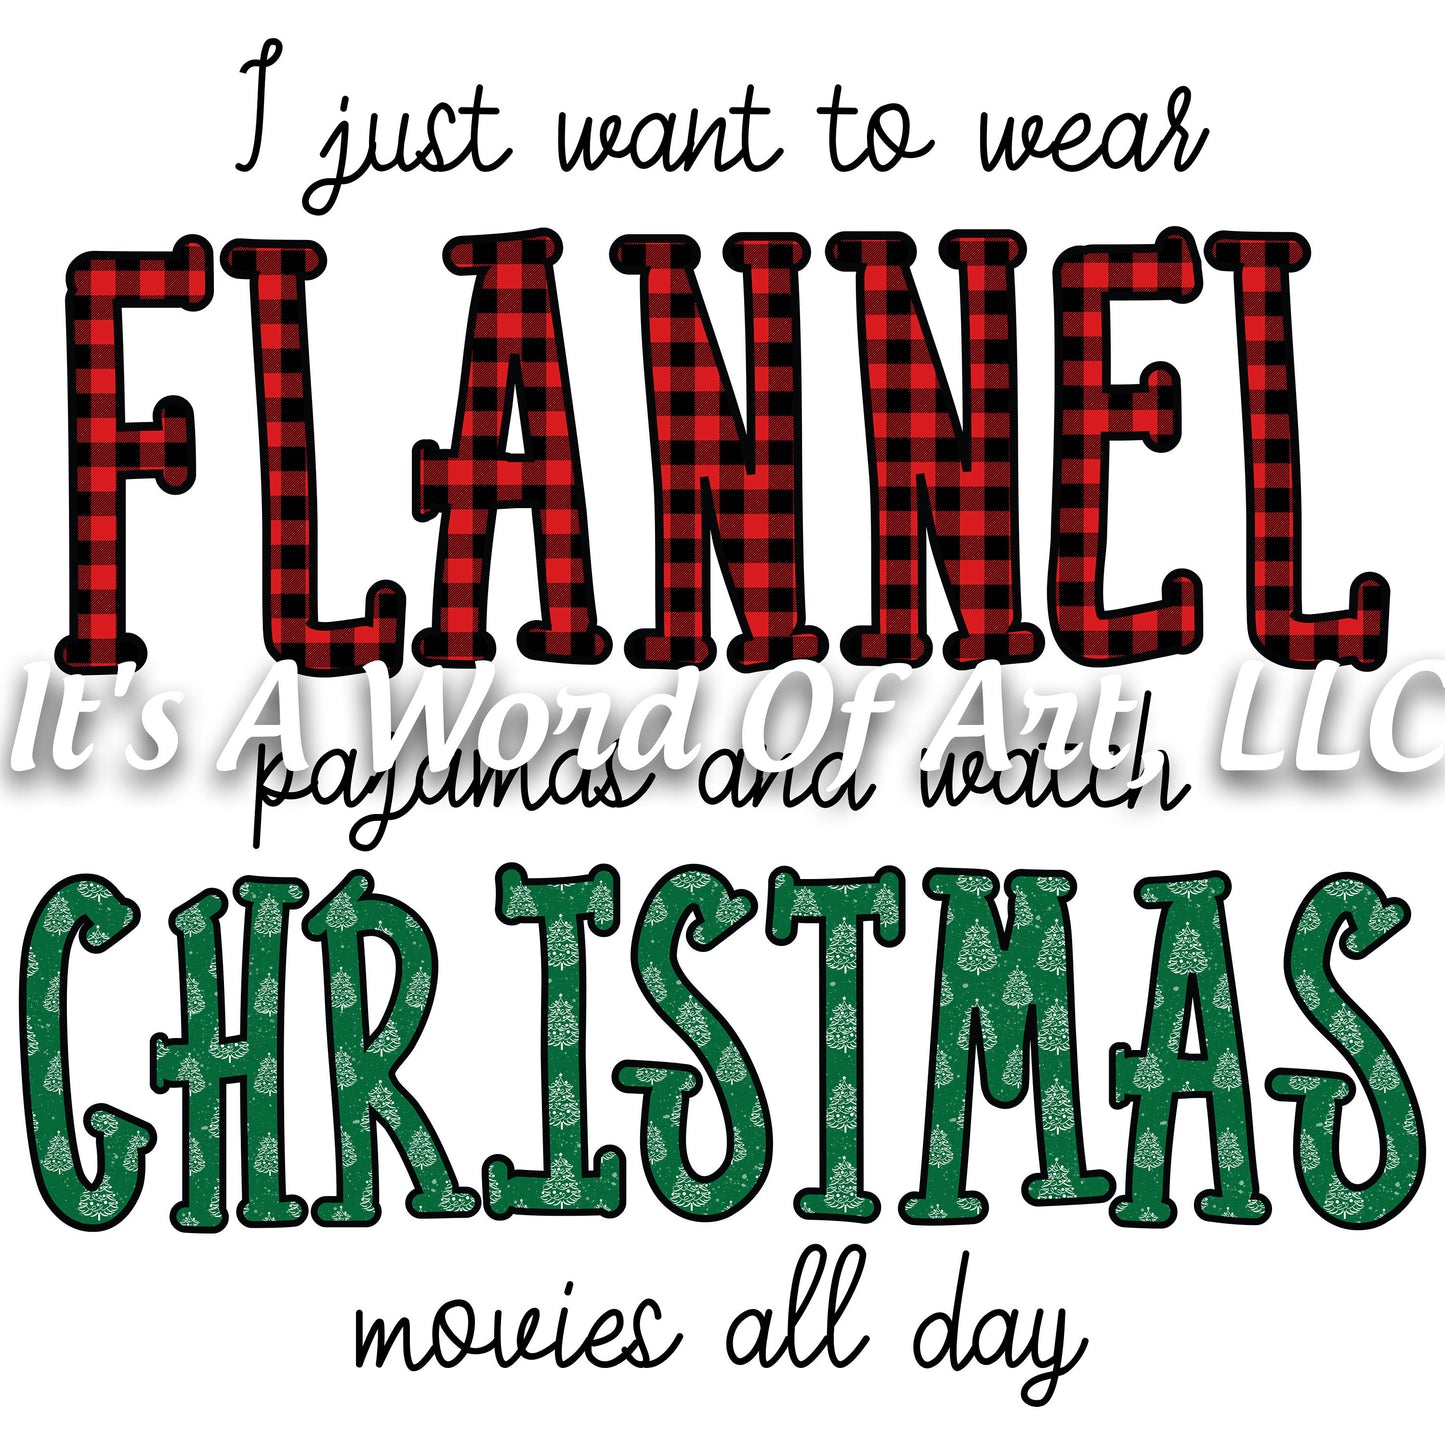 Christmas 244 - Wear Flannel Pajamas Watch Christmas - Sublimation Transfer Set/Ready To Press Sublimation Transfer/Sublimation Transfer